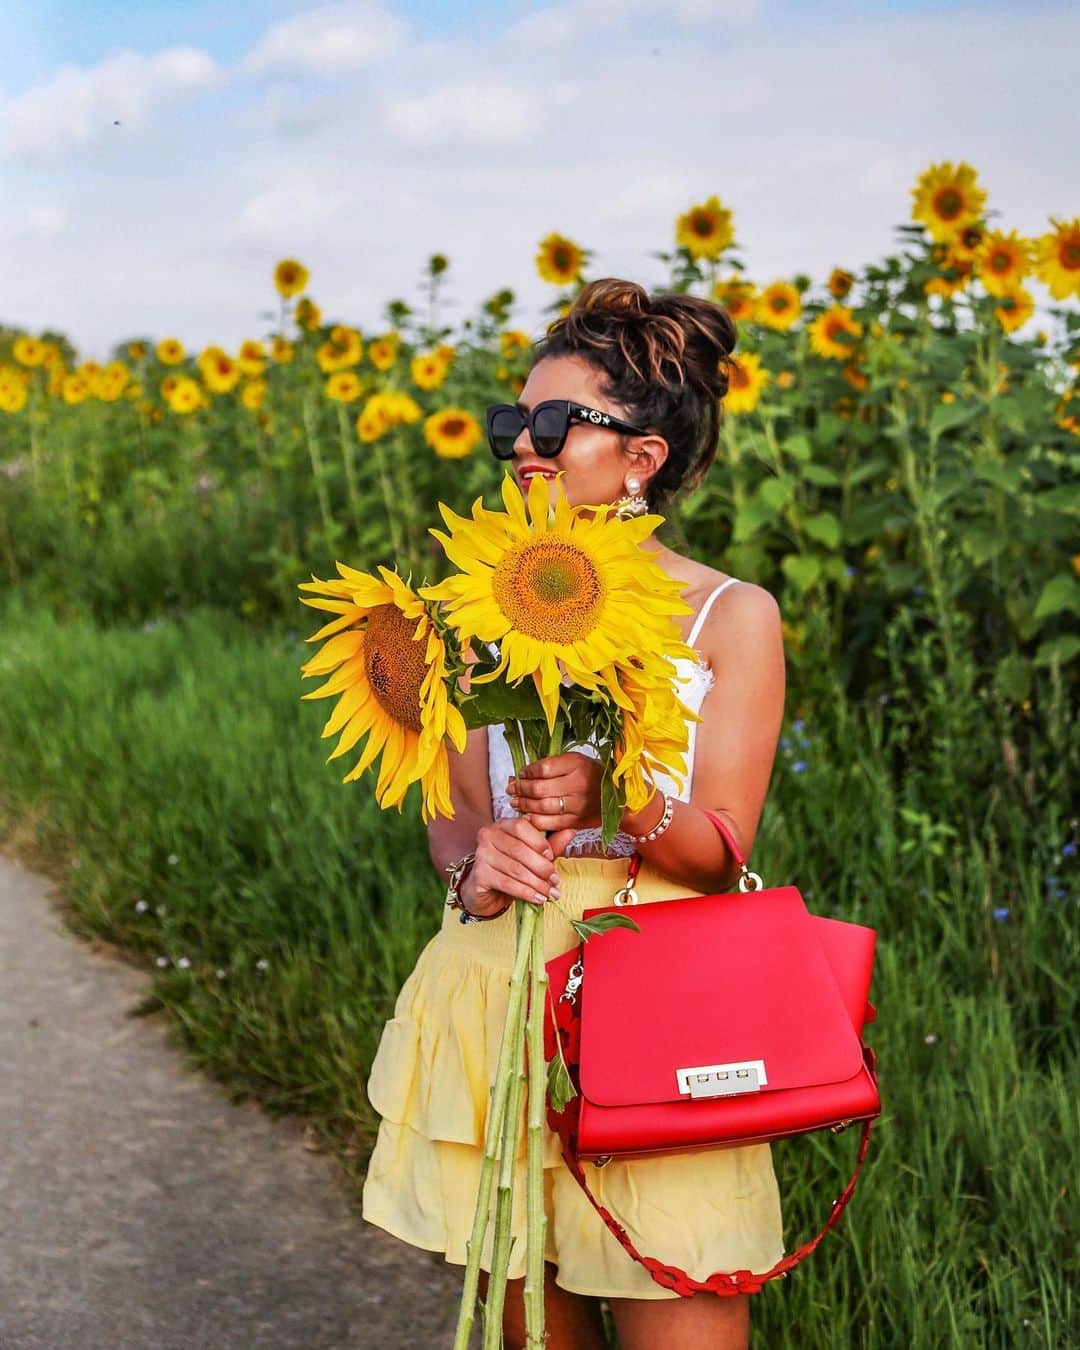 Anniのインスタグラム：「Advice from a sunflower: Be bright, sunny and positive. Spread seeds of happiness. Rise, shine, and hold your head high 🌾🌻☀️✨❤️💋#happyfriday #weekendvibes ——————————————————————————— • • • • •  #outfit #fashion #fashionblogger #ootd  #shopbop #fashionblogger_de #blogger #inspiration #inspo #girl #me #look #ig #kissinfashion #americanstyle #stuttgart #liketkit #love #germany #naturelover」